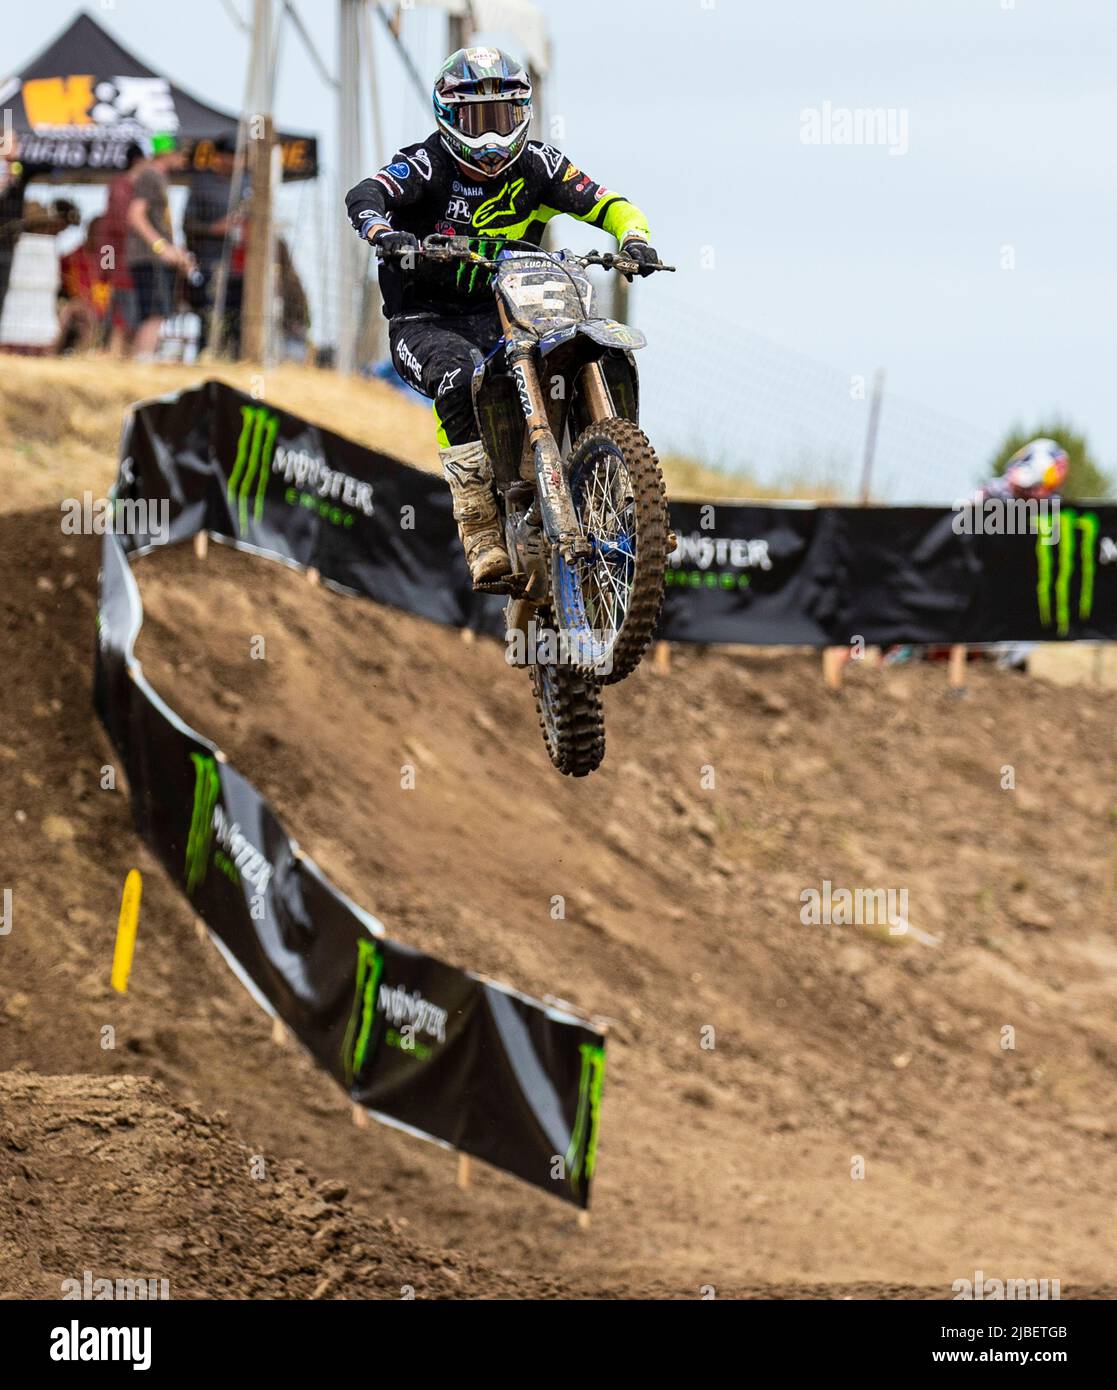 Cordova, CA, June 04 2022 Rancho Cordova, CA USA Eli Tomac gets big air in section 20 during the Lucas Oil Pro Motocross Hangtown Classic 450 Group A qualifying at Hangtown Rancho Cordova, CA Thurman James/CSM Stock Photo